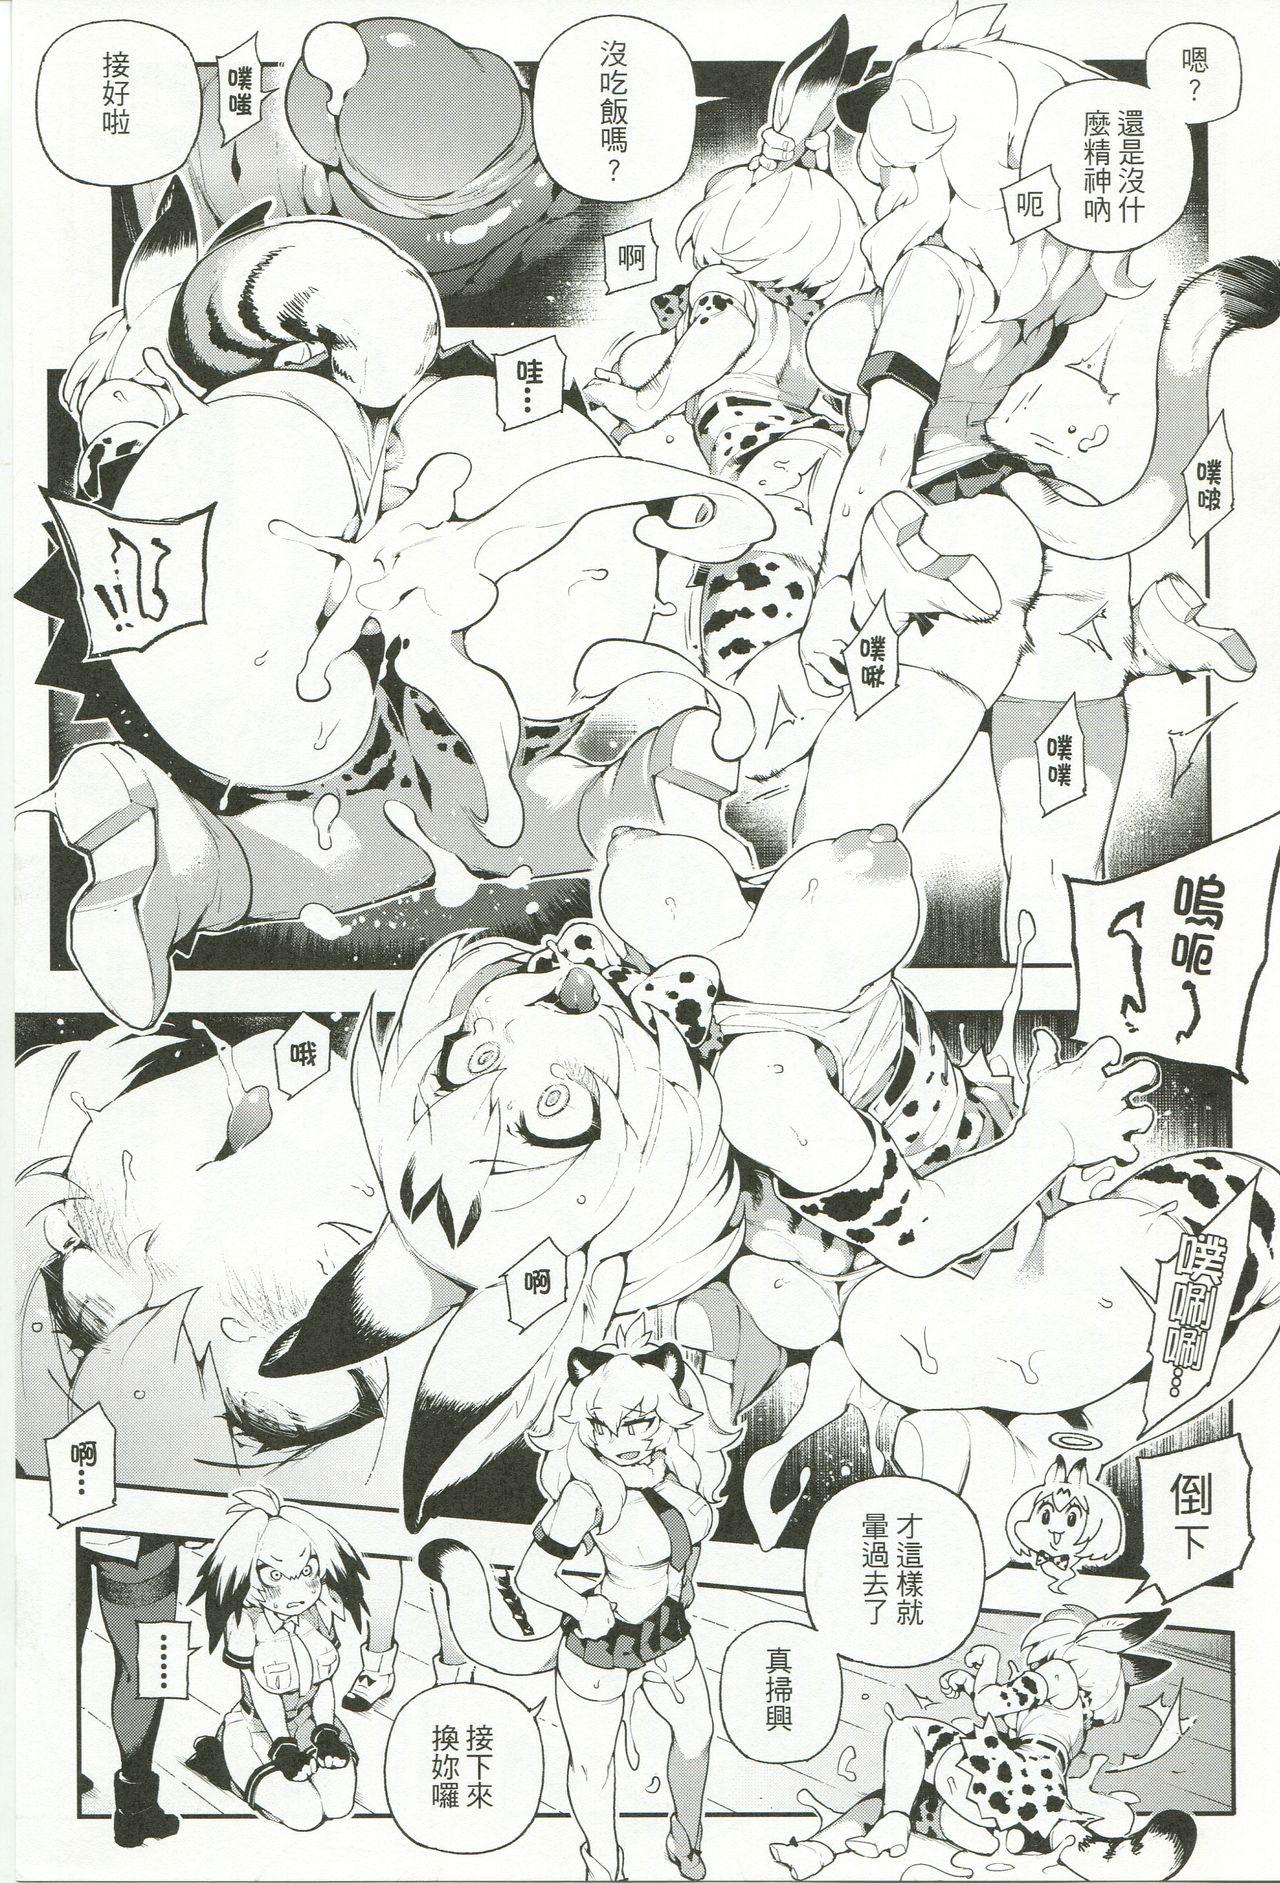 Cheating BEAST FRIENDS - Kemono friends Interracial Porn - Page 11